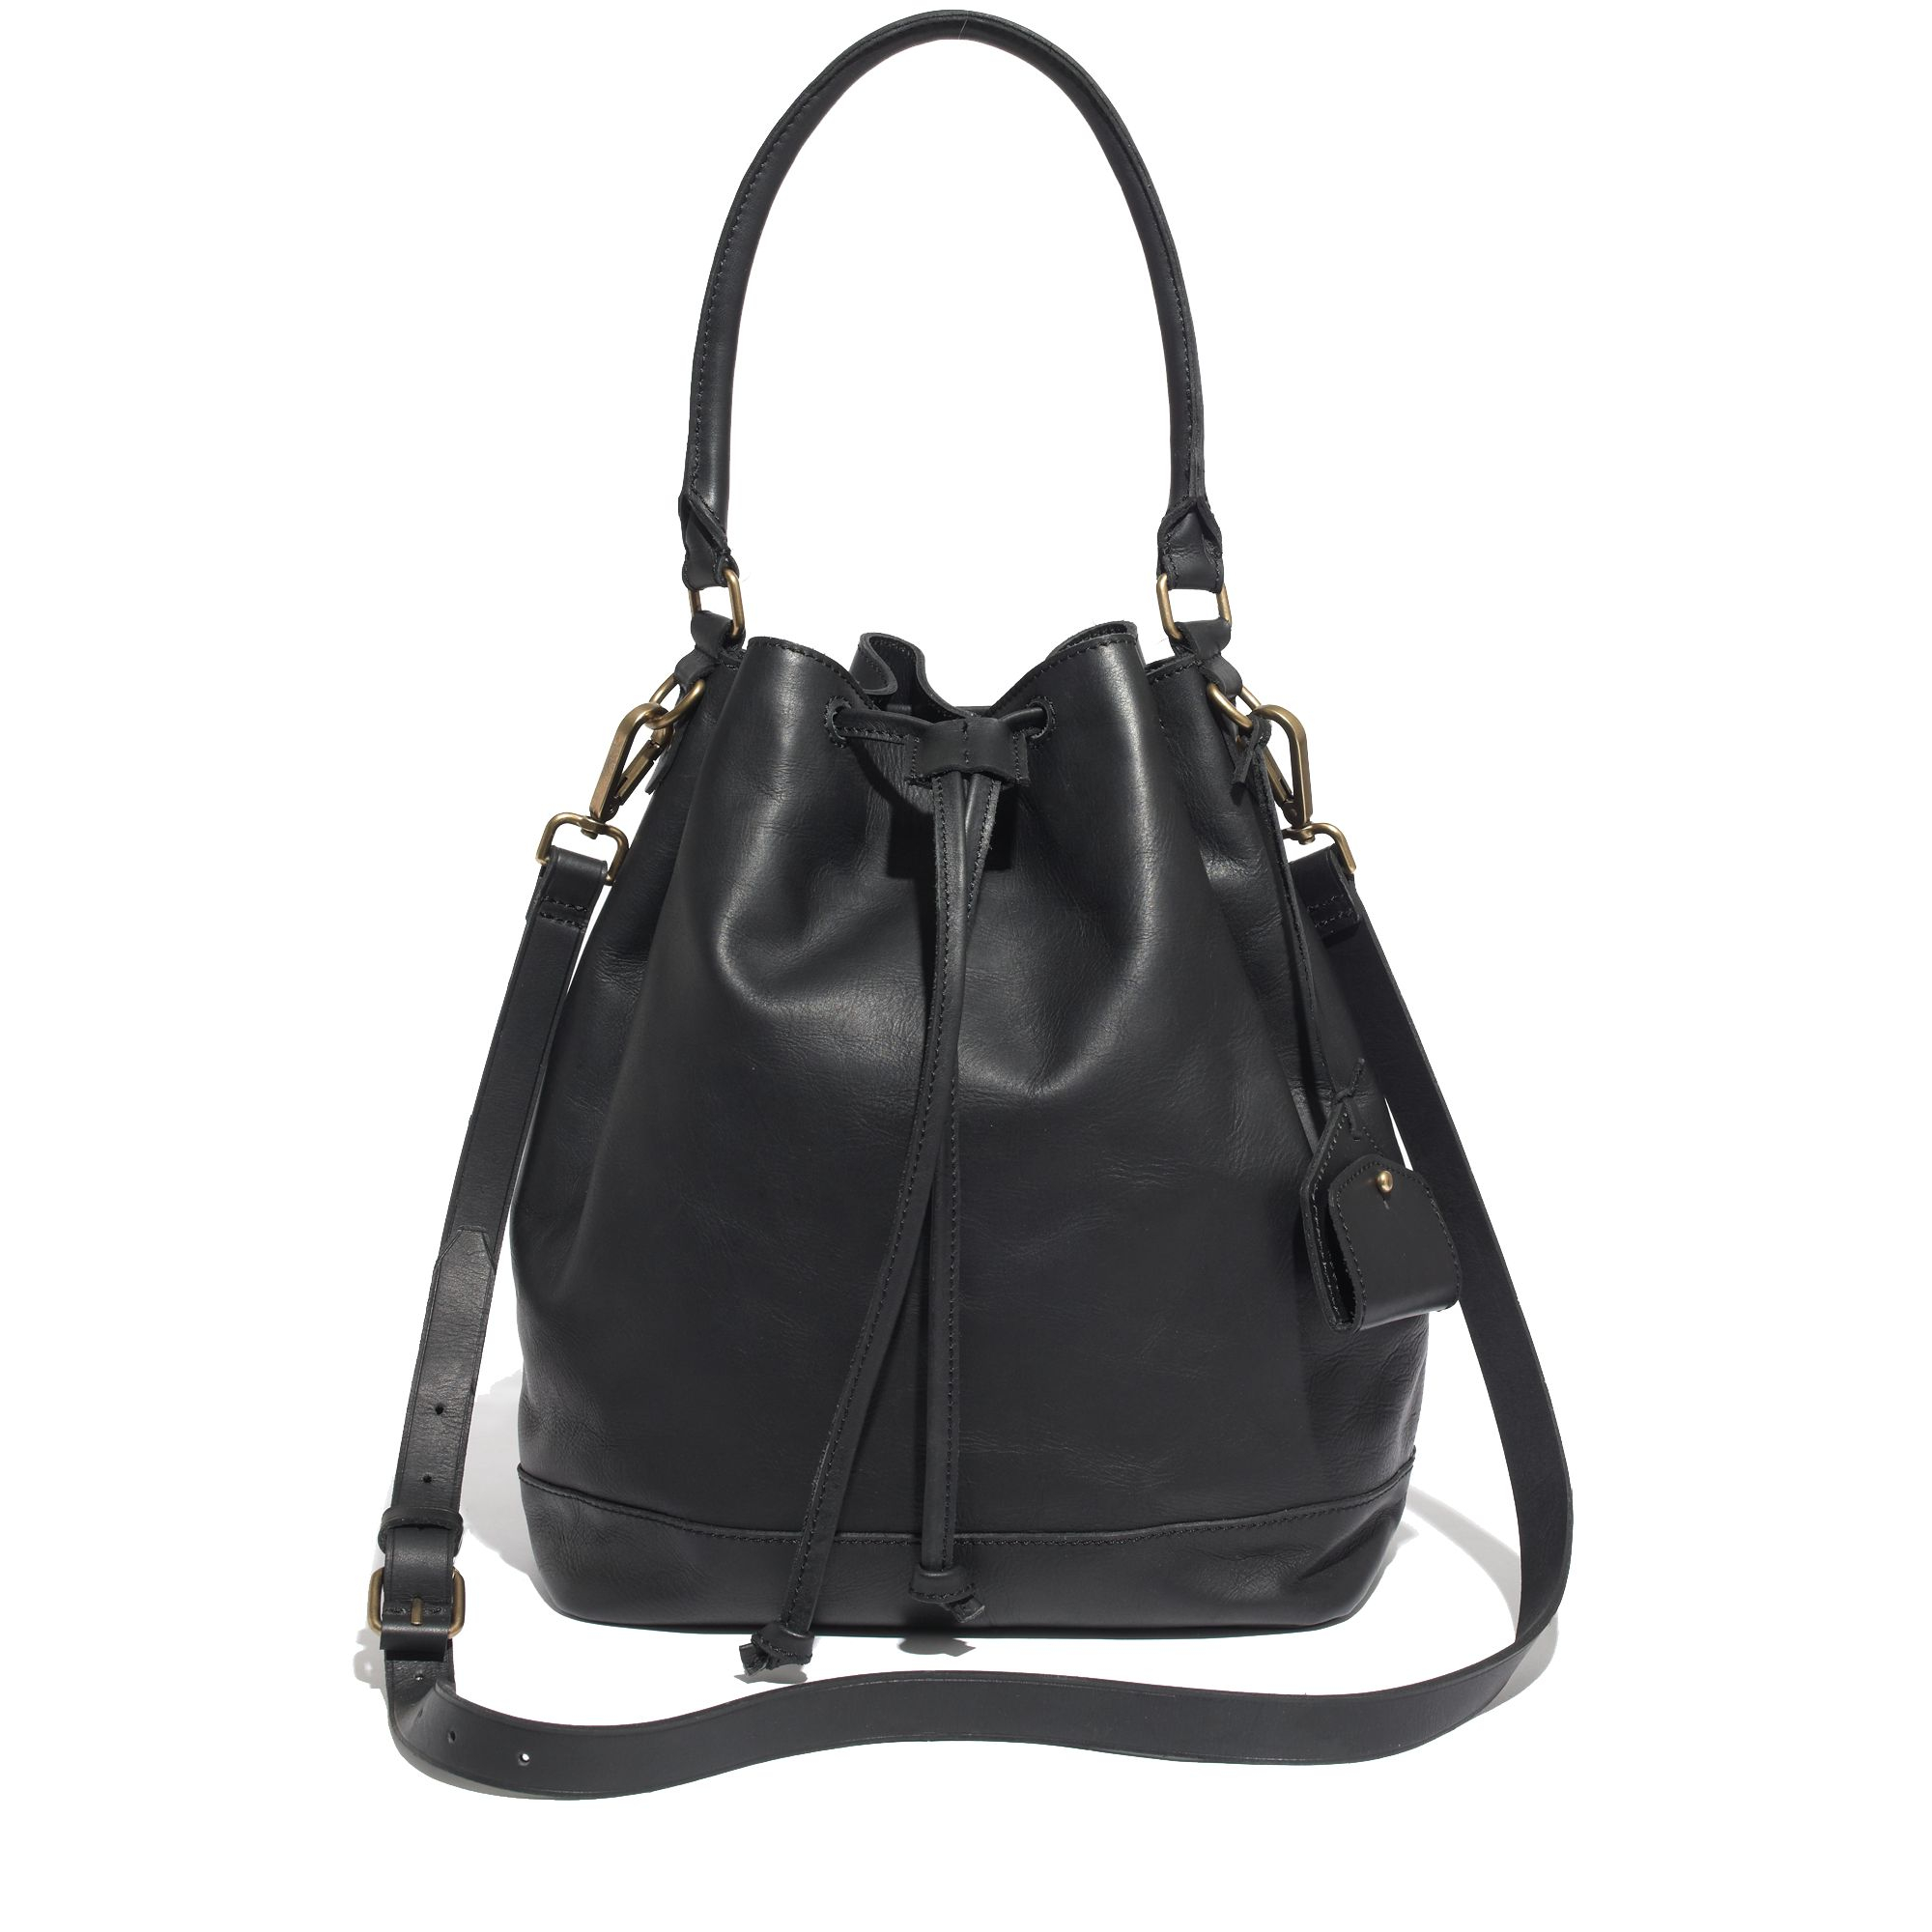 Lyst - Madewell The Lafayette Bucket Bag in Black